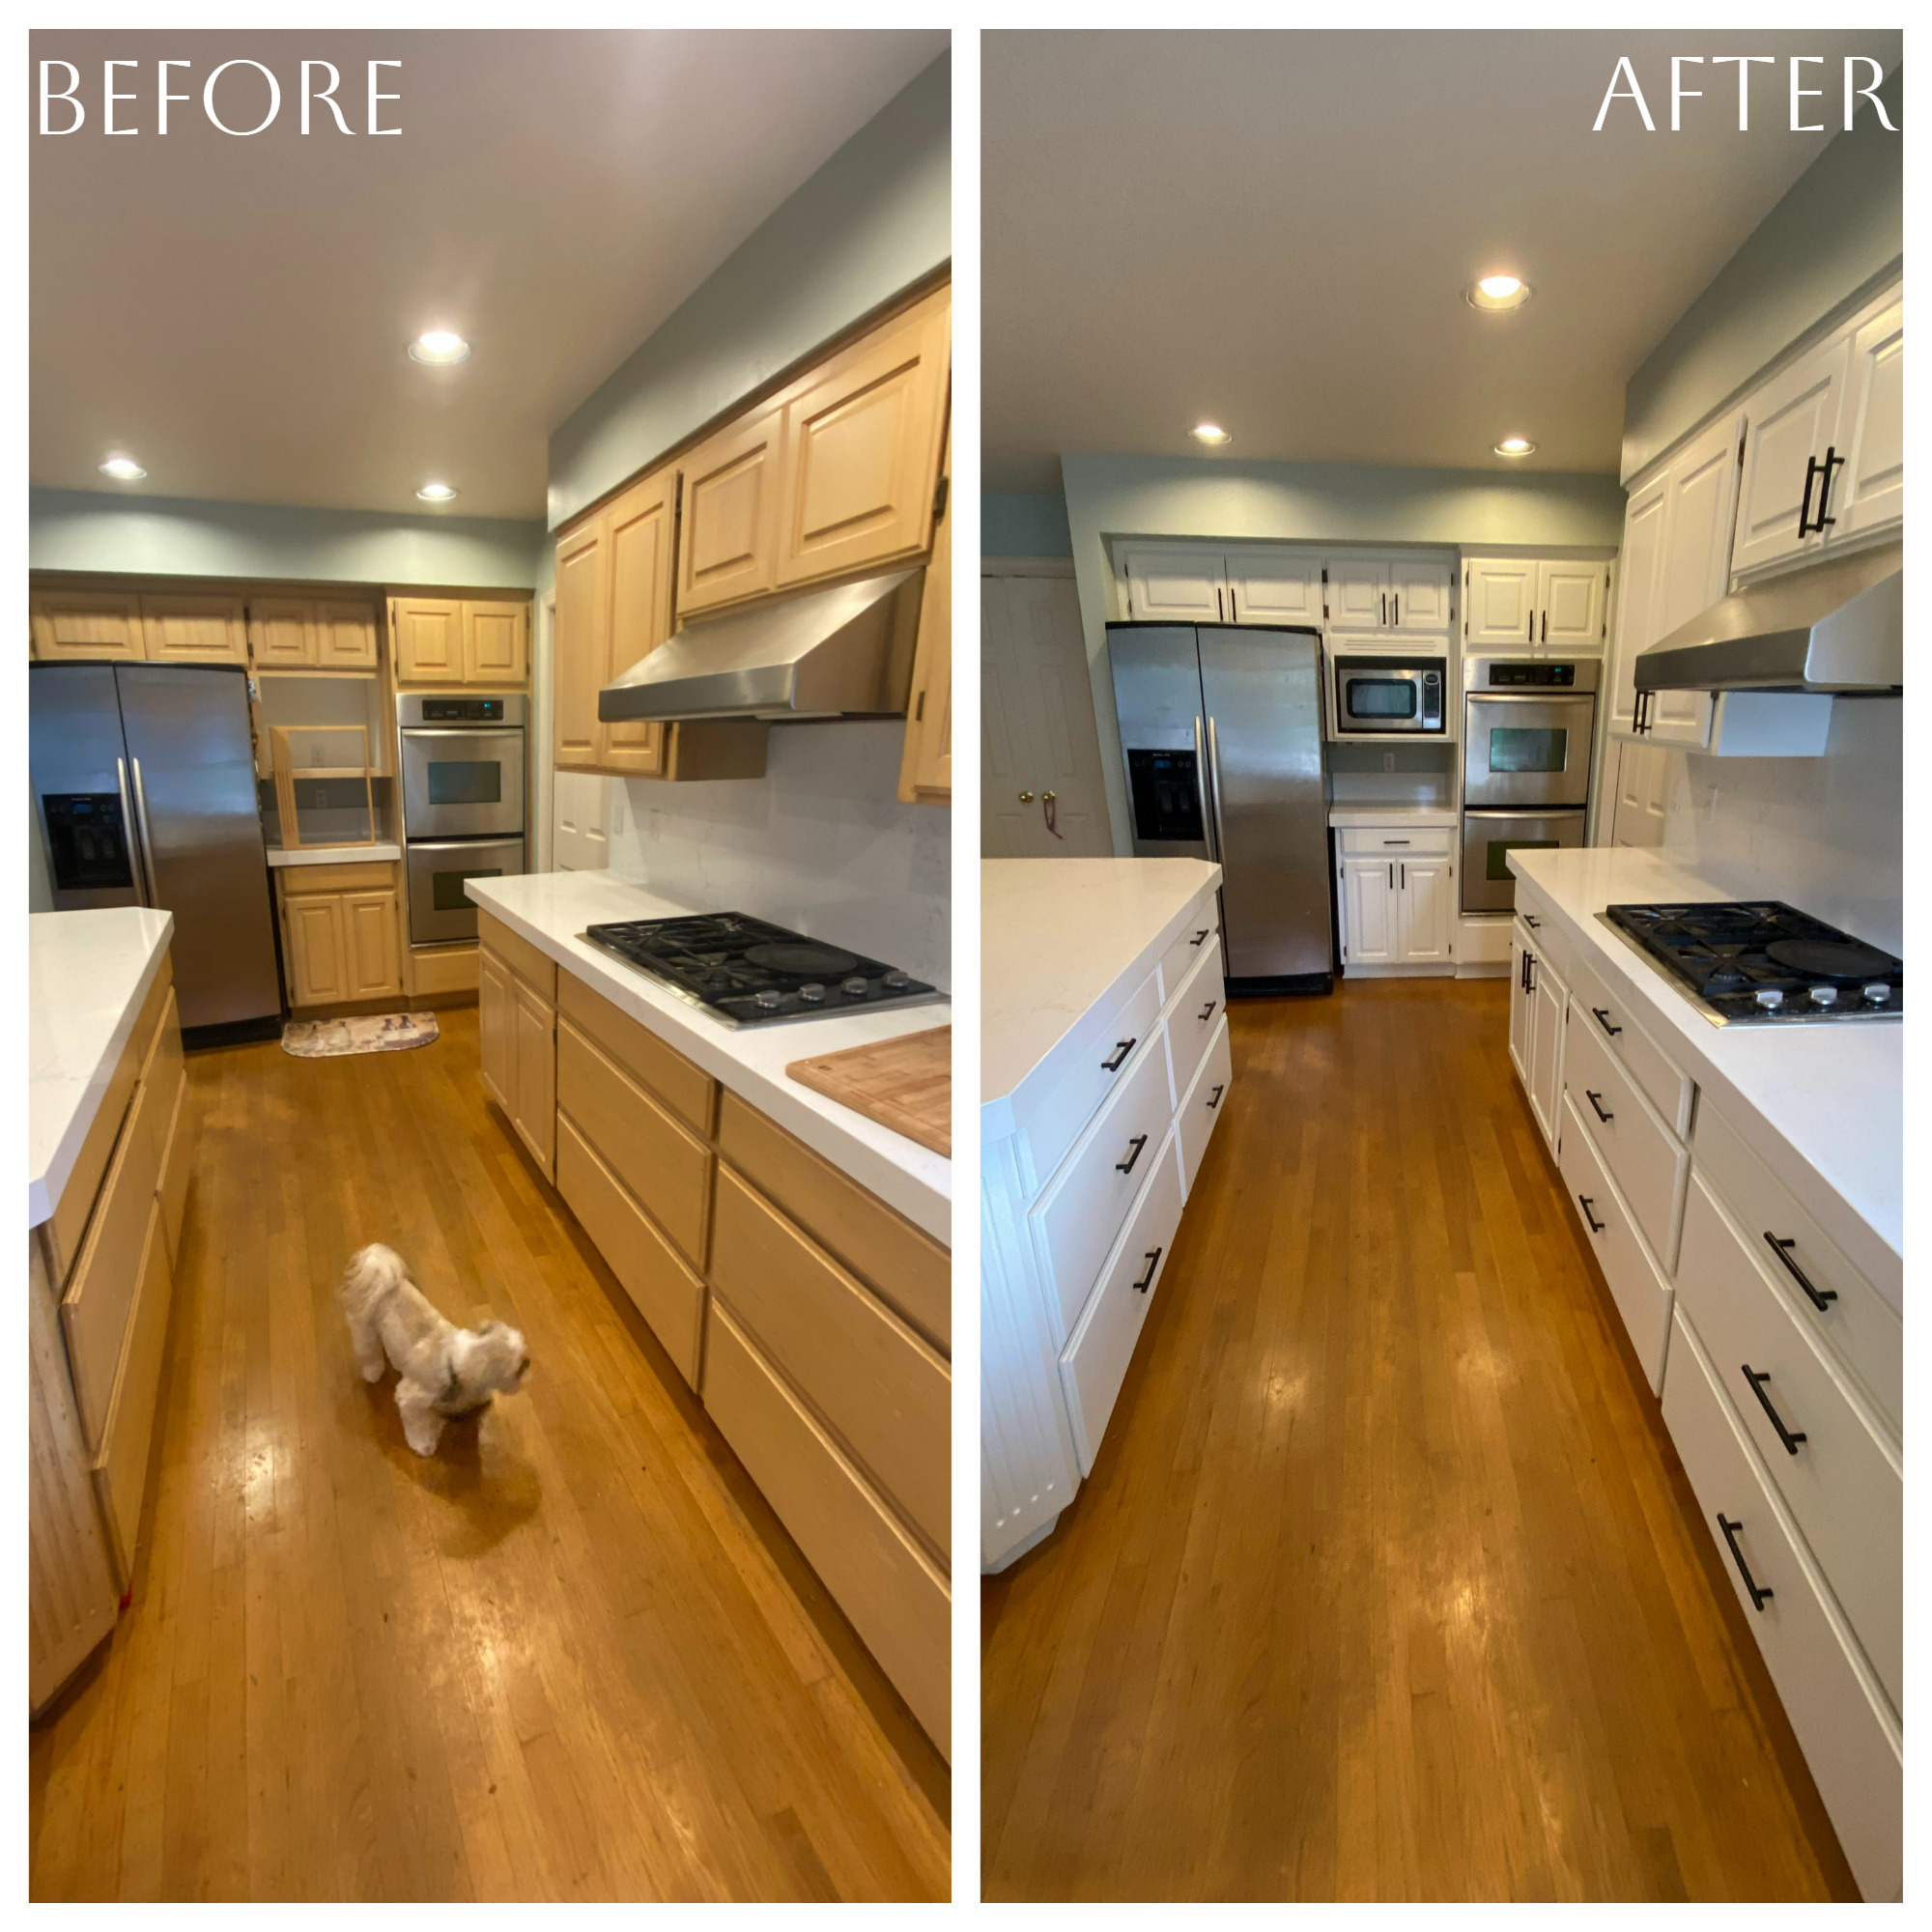 Before and after of wood cabinets professionally painted white in Tigard, Oregon kitchen